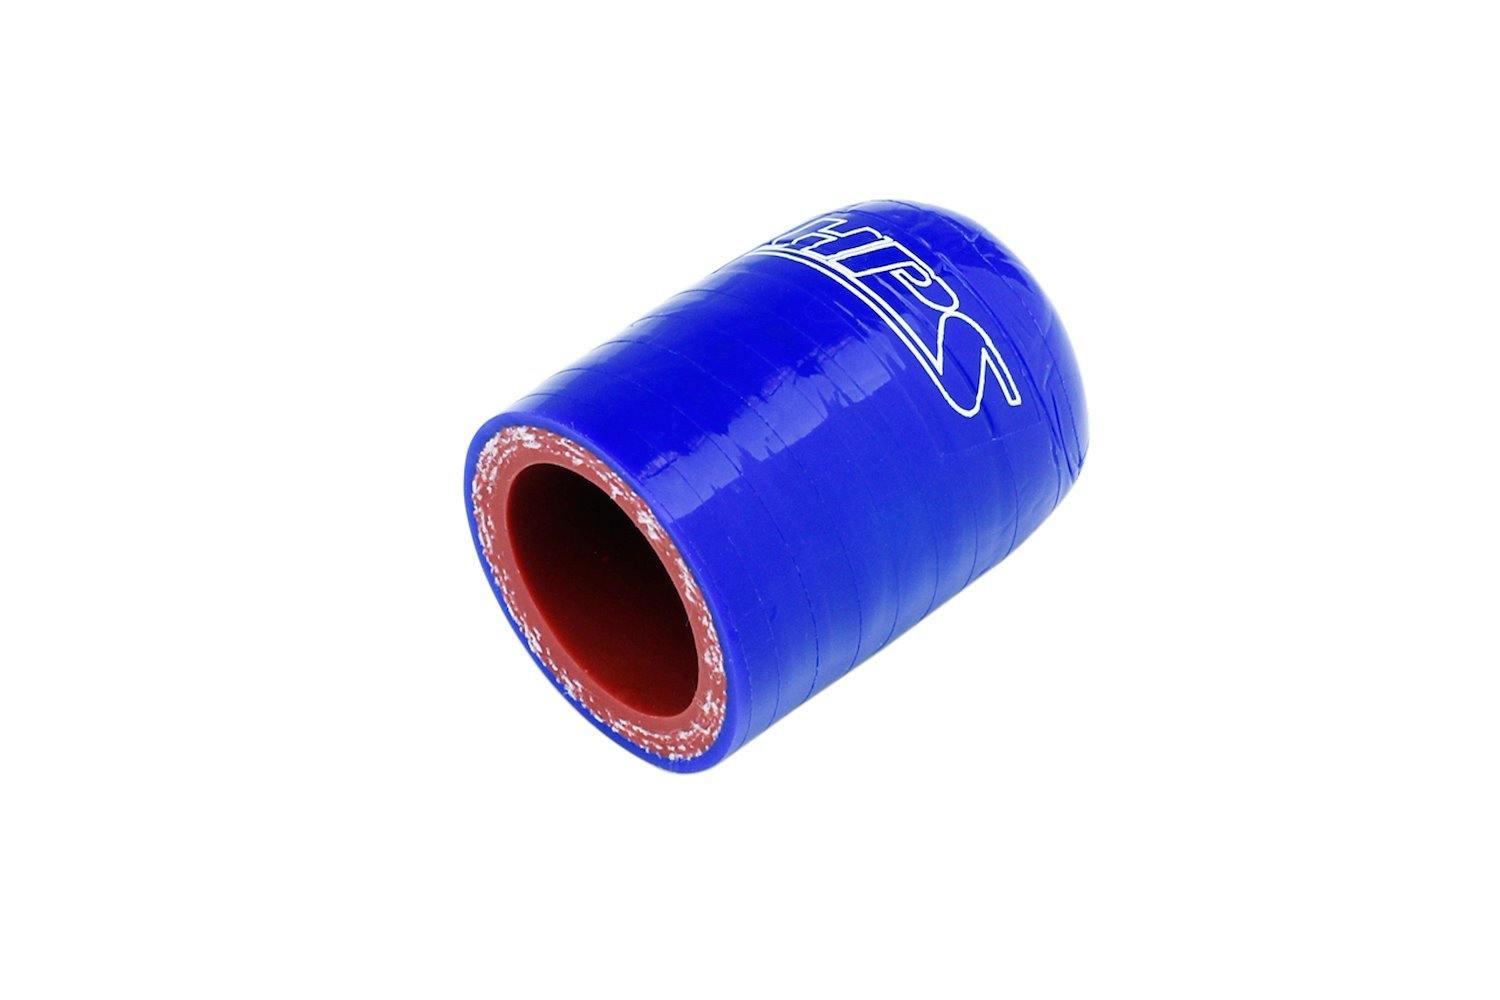 RSCC-044-BLUE Coolant Bypass Cap, 3-Ply Reinforced High-Temp. Silicone Bypass Cap, 7/16 in. ID, Blue